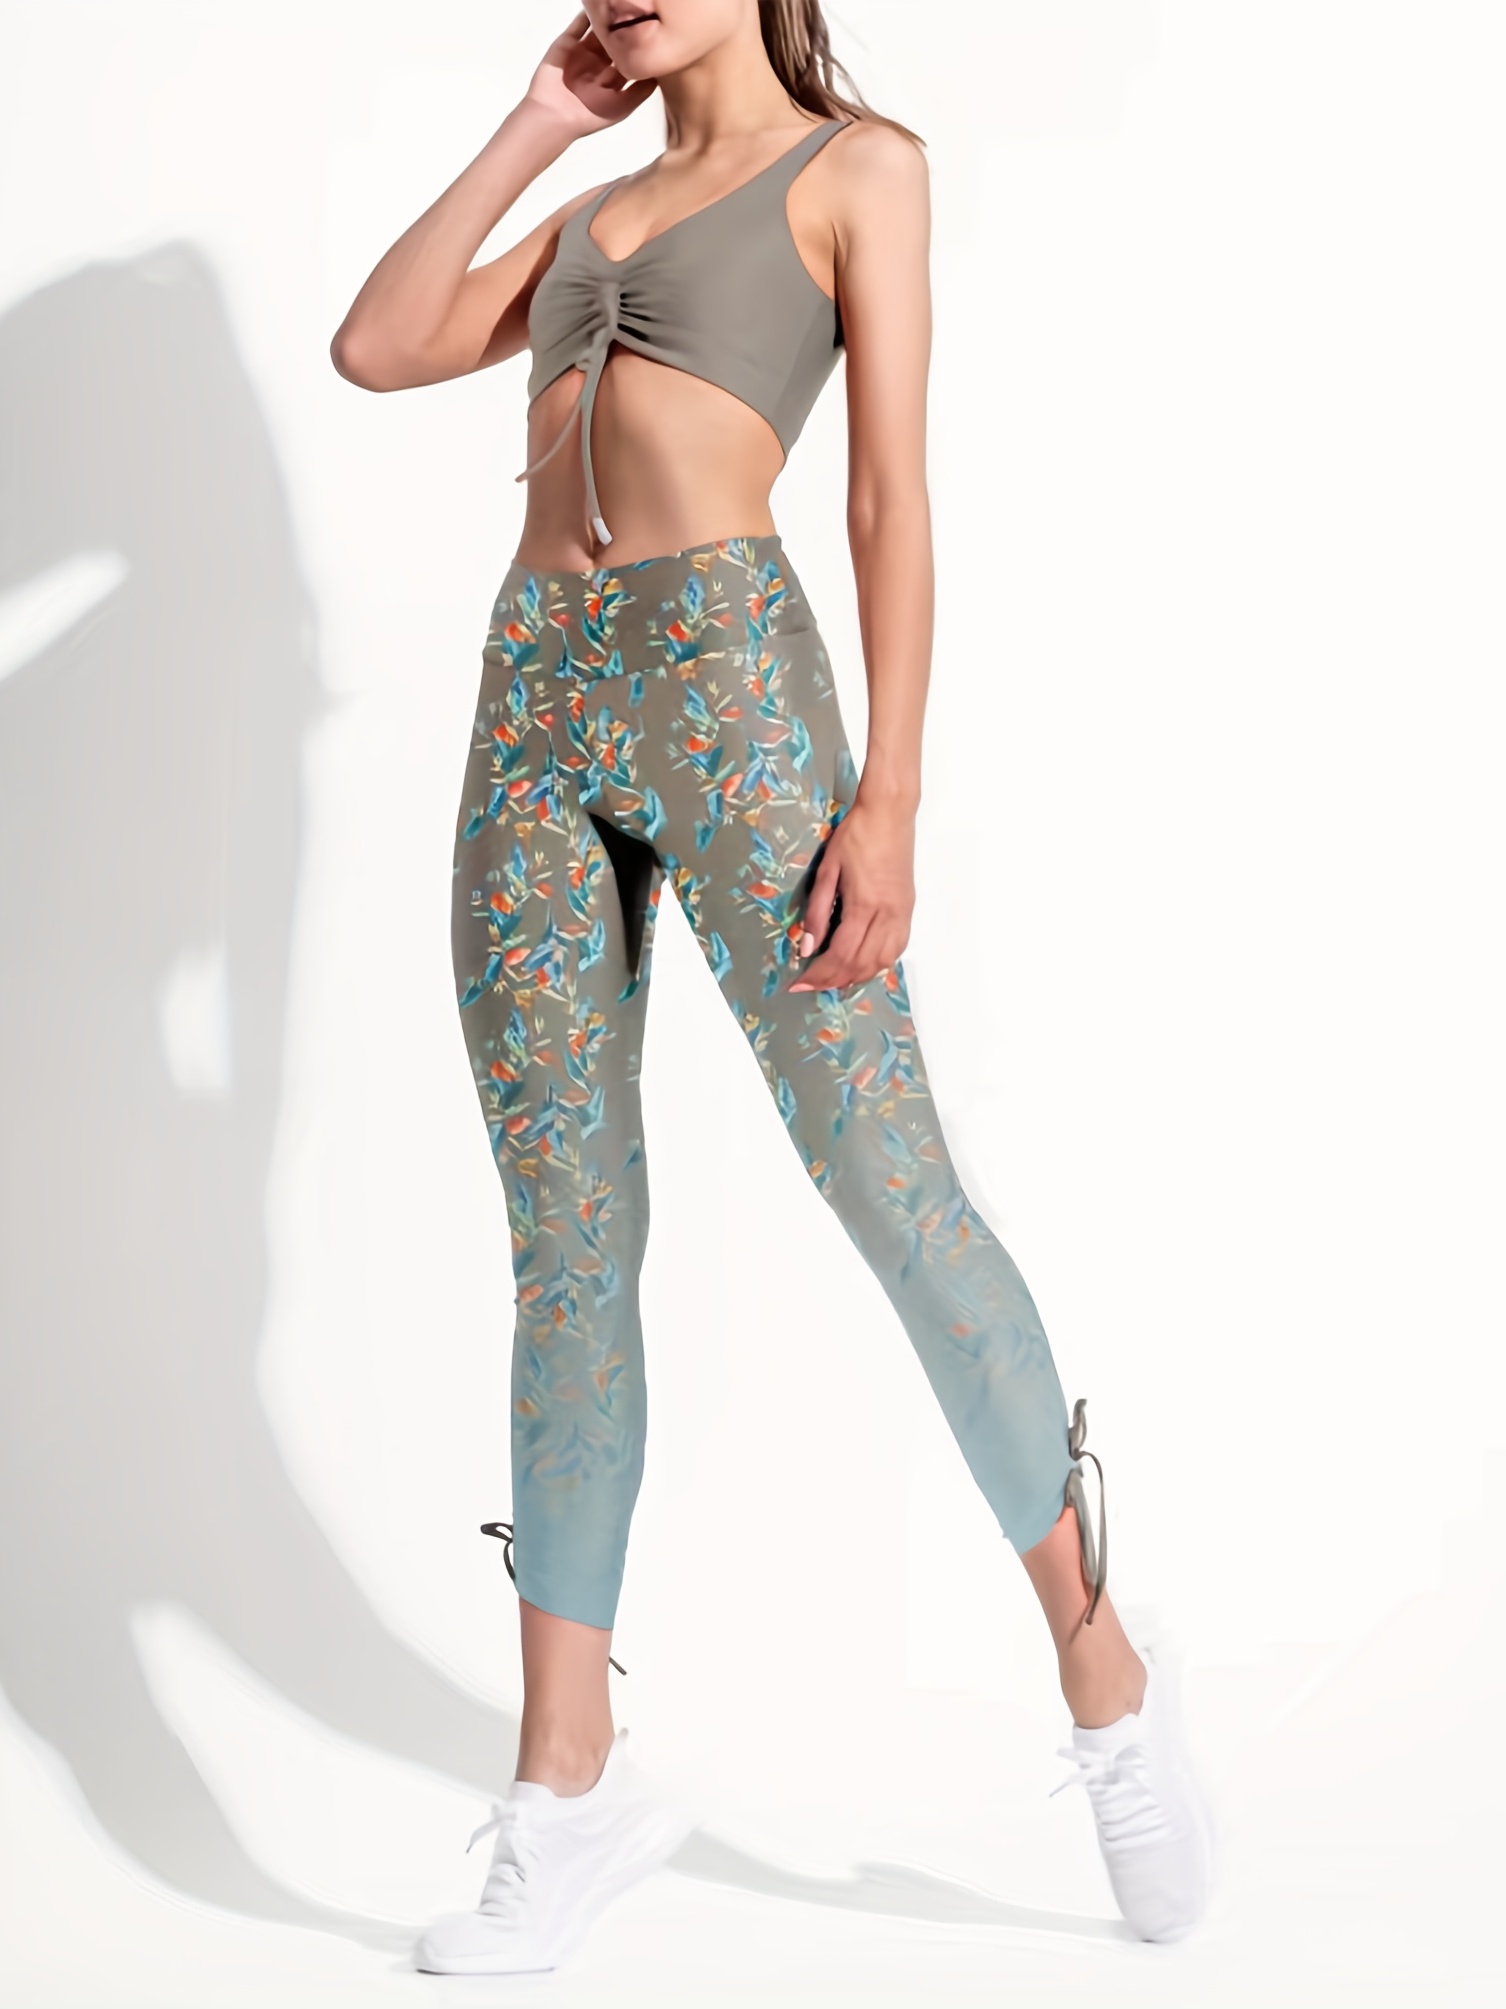 Stylish Floral Graphic Yoga Leggings - High Stretch Printed Workout Pants  for Women's Activewear